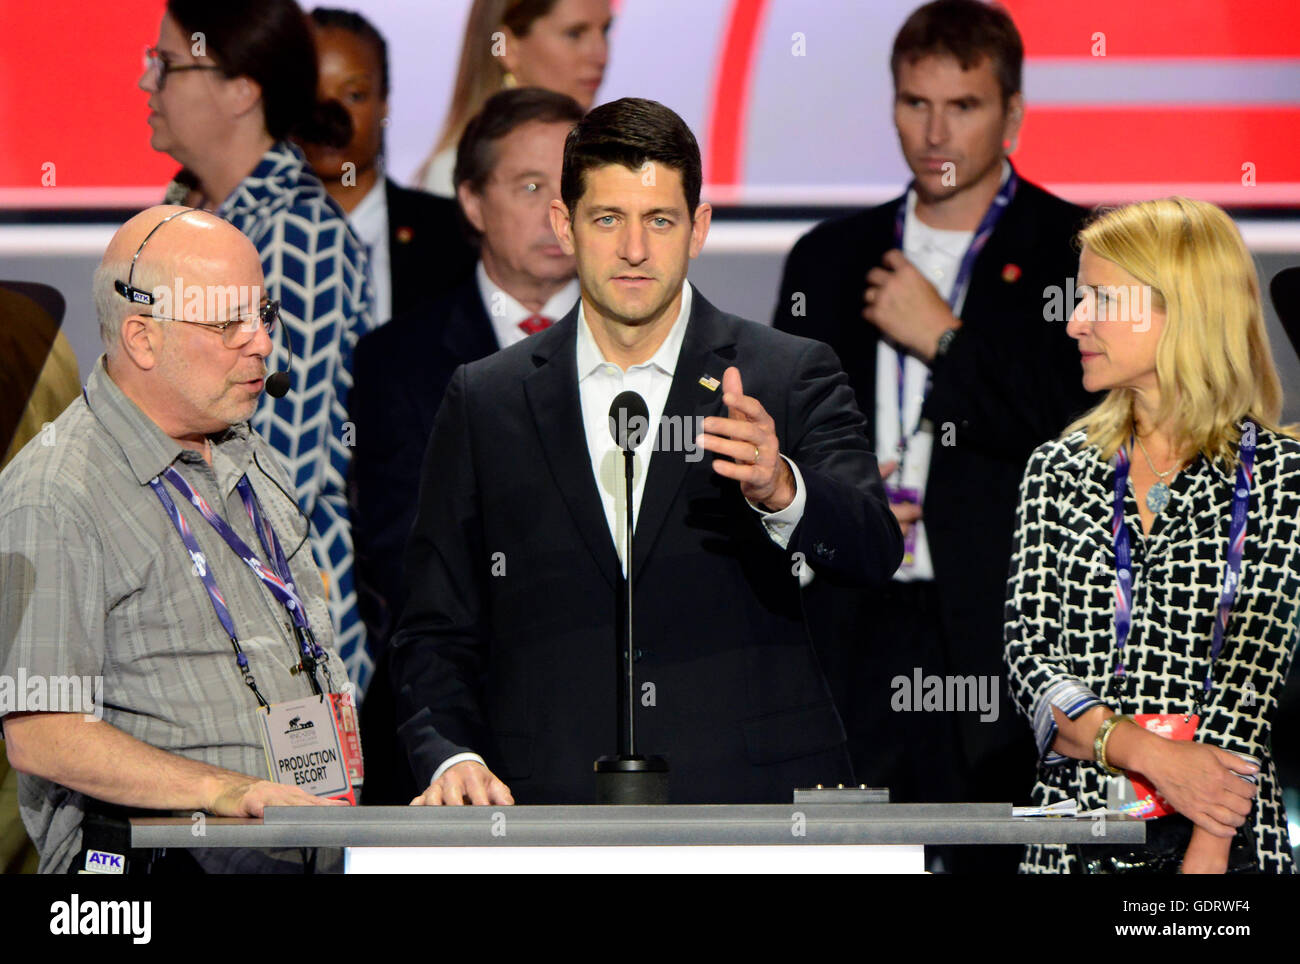 United States Speaker of the House Paul Ryan (Republican of Wisconsin) and his wife Janna participate in a rehearsal prior to the 2016 Republican National Convention in Cleveland, Ohio on Sunday, July 17, 2016. Standing behind them and pointing is US . Credit: Ron Sachs / CNP (RESTRICTION: NO New York or New Jersey Newspapers or newspapers within a 75 mile radius of New York City) - NO WIRE SERVICE - Stock Photo